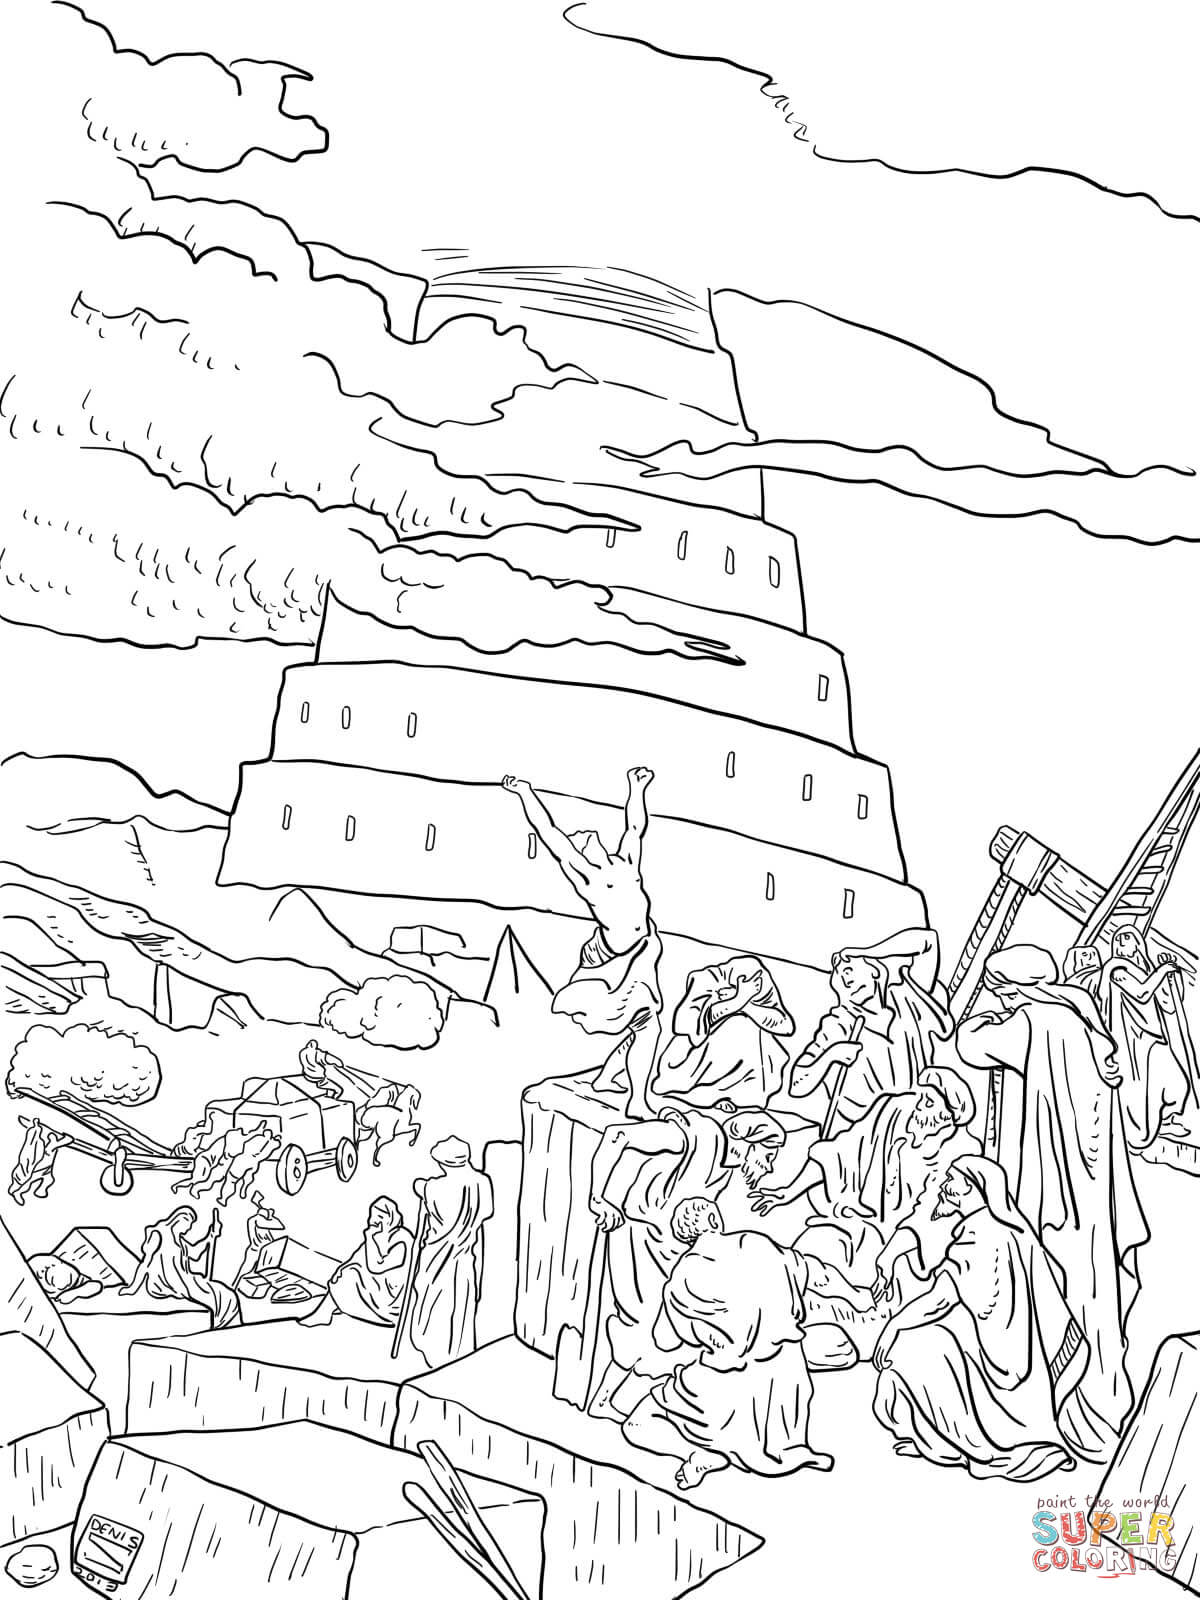 Tower of Babel and the Confusion of Tongues coloring page | Free